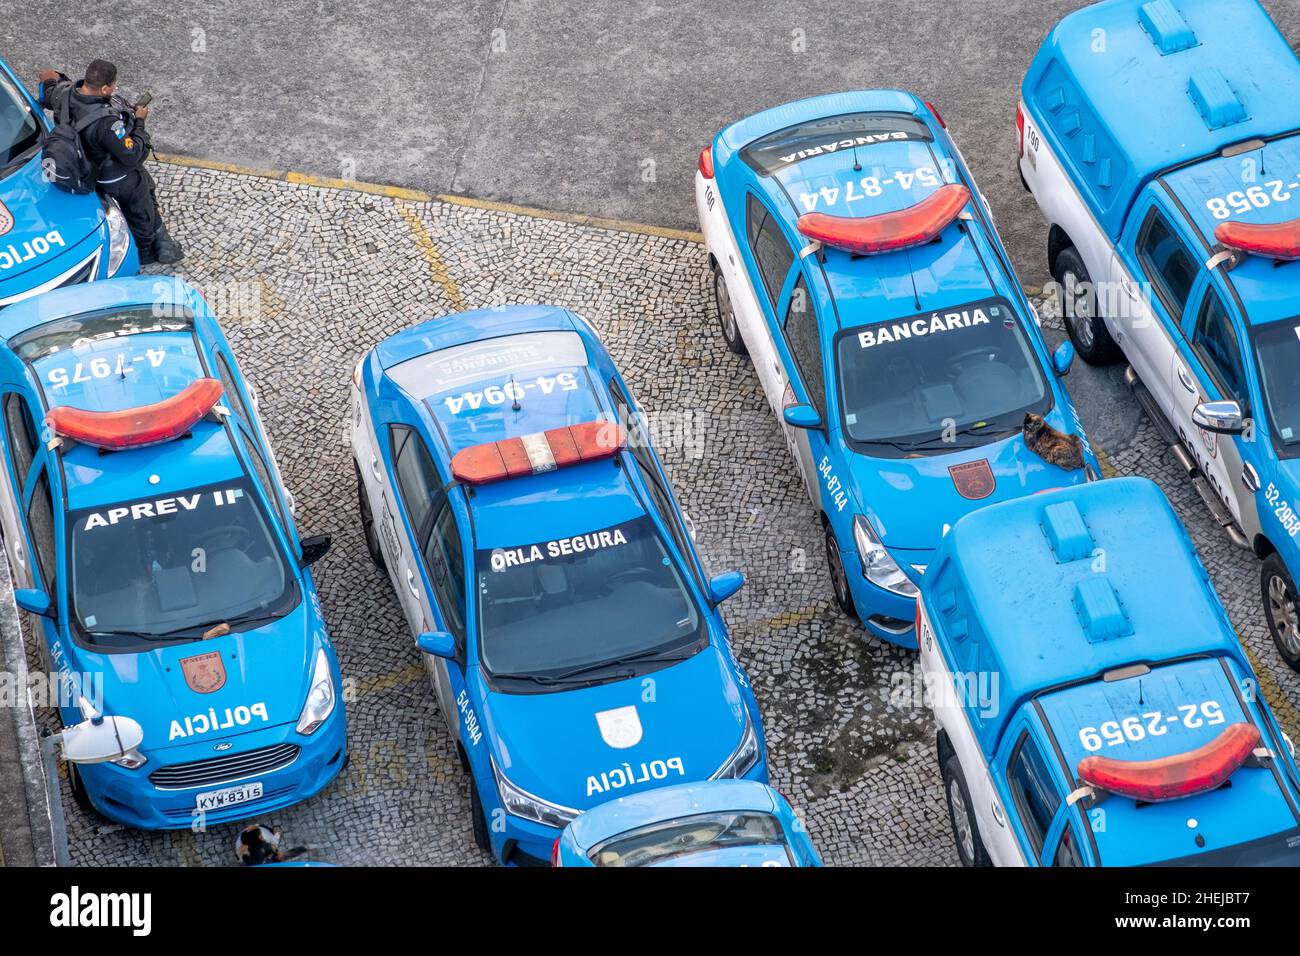 Police cars in a police station. PM (Policia Militar) Militia Police, vehicles photographed from above, law enforcement, Rio de Janeiro, Brazil Stock Photo